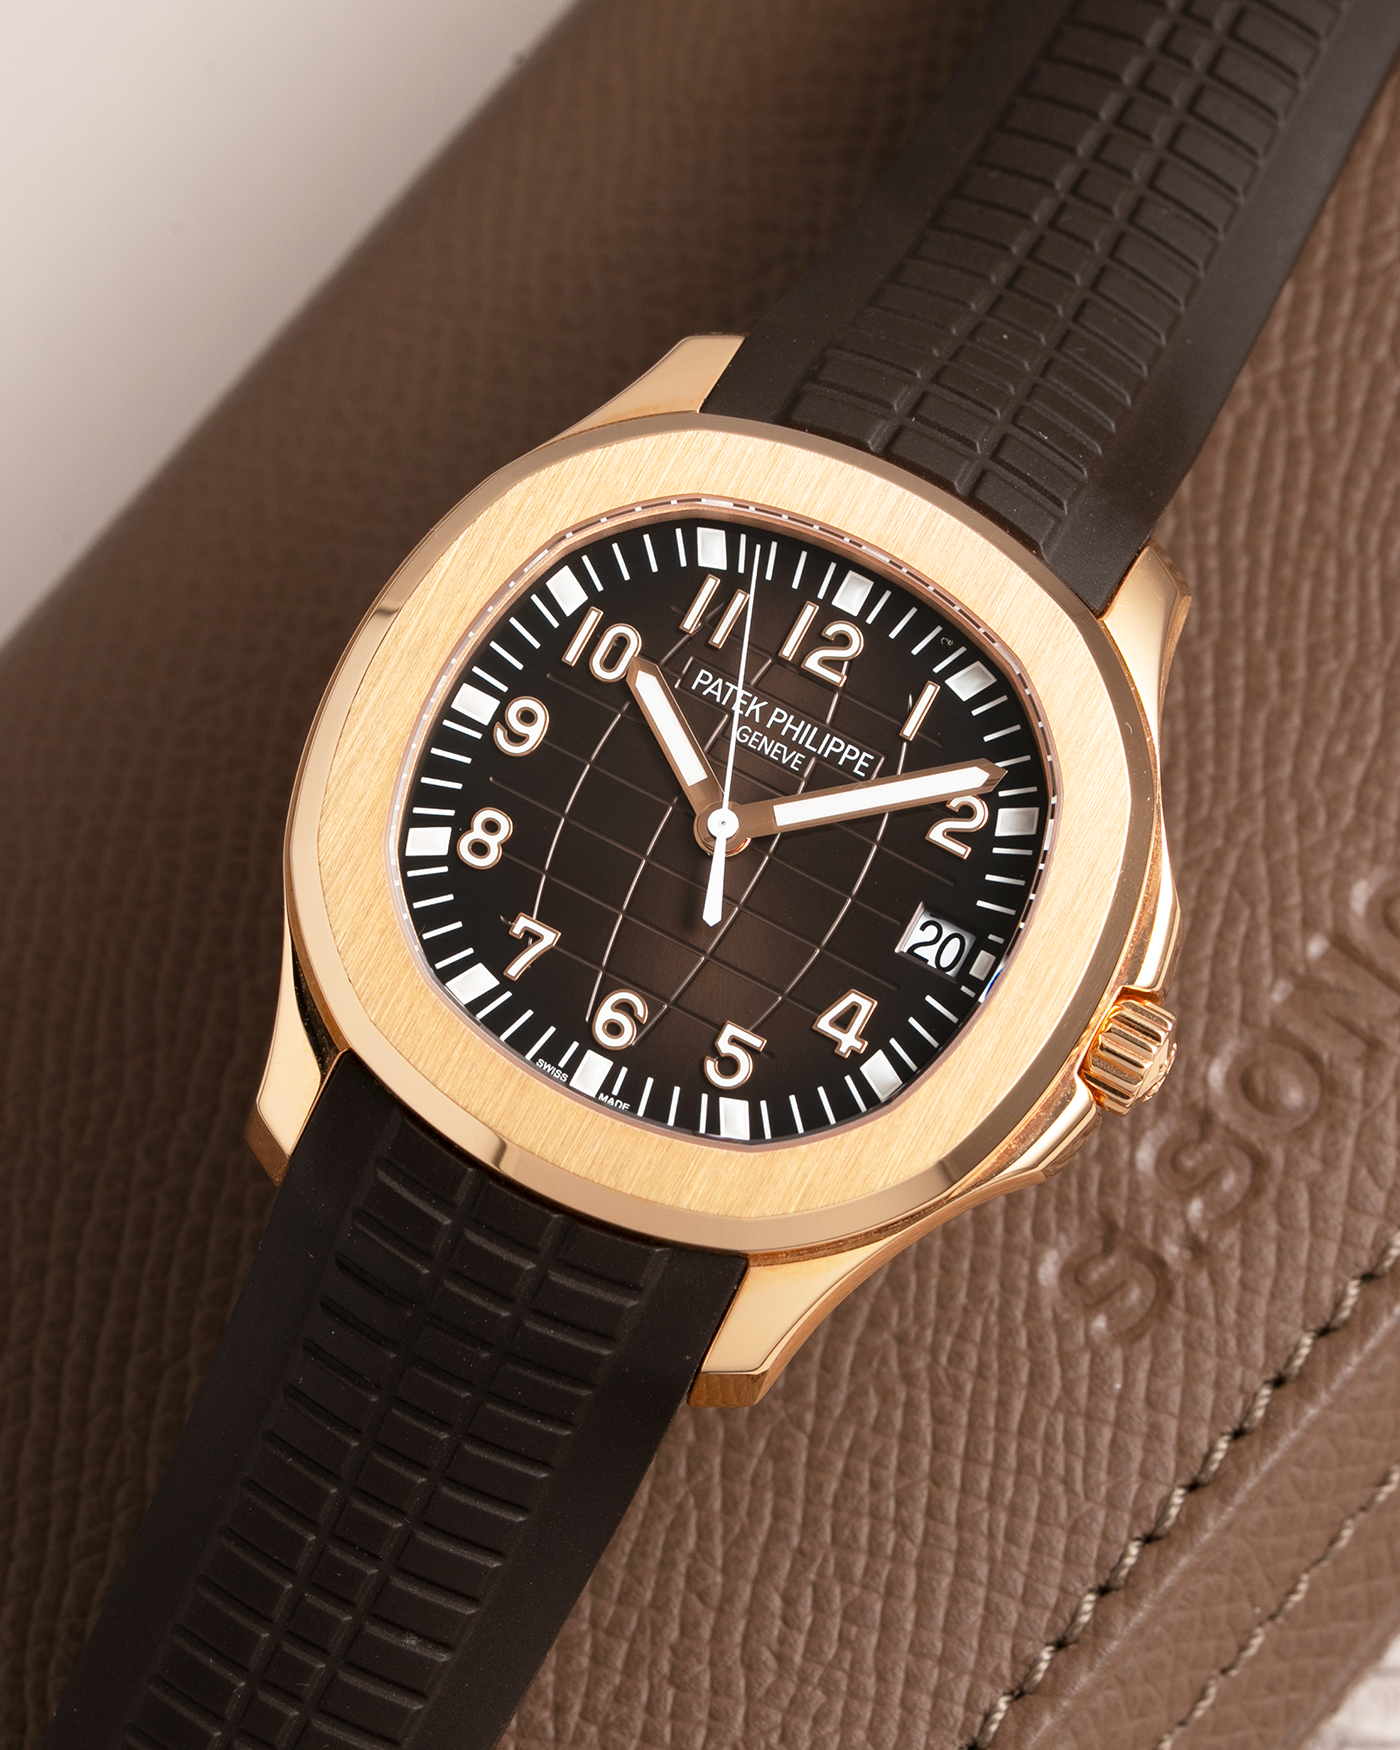 Brand: Patek Philippe Year: 2018 Model: Aquanaut Reference Number: 5167R Material: Stainless Steel Movement: Self Winding Patek Philippe Caliber 324 S C Case Diameter: 40mm Strap: Patek Philippe Aquanaut Brown Rubber Strap